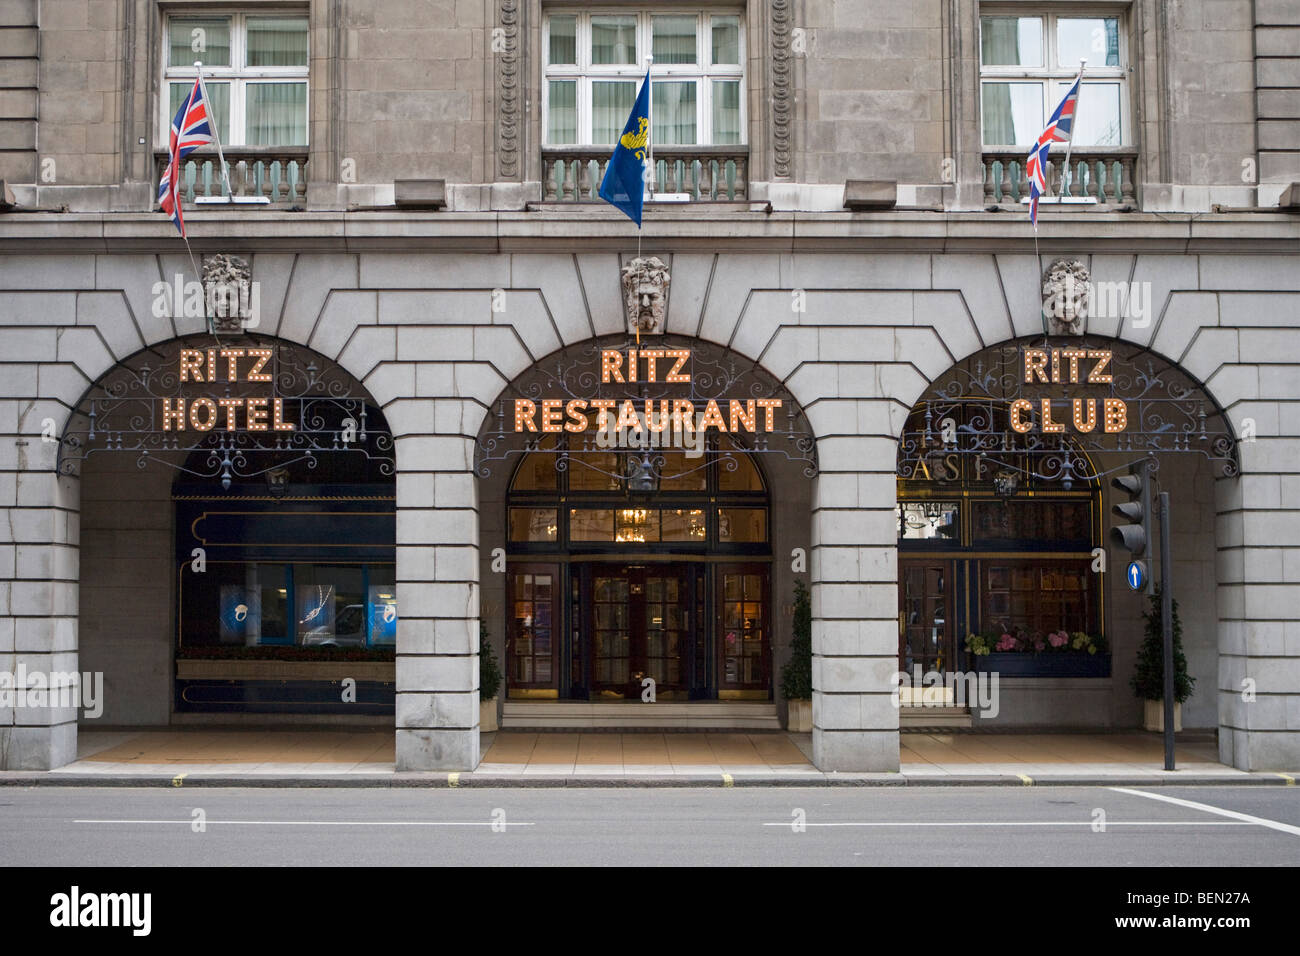 Frontage of Ritz Hotel, Piccadilly, London, England Stock Photo